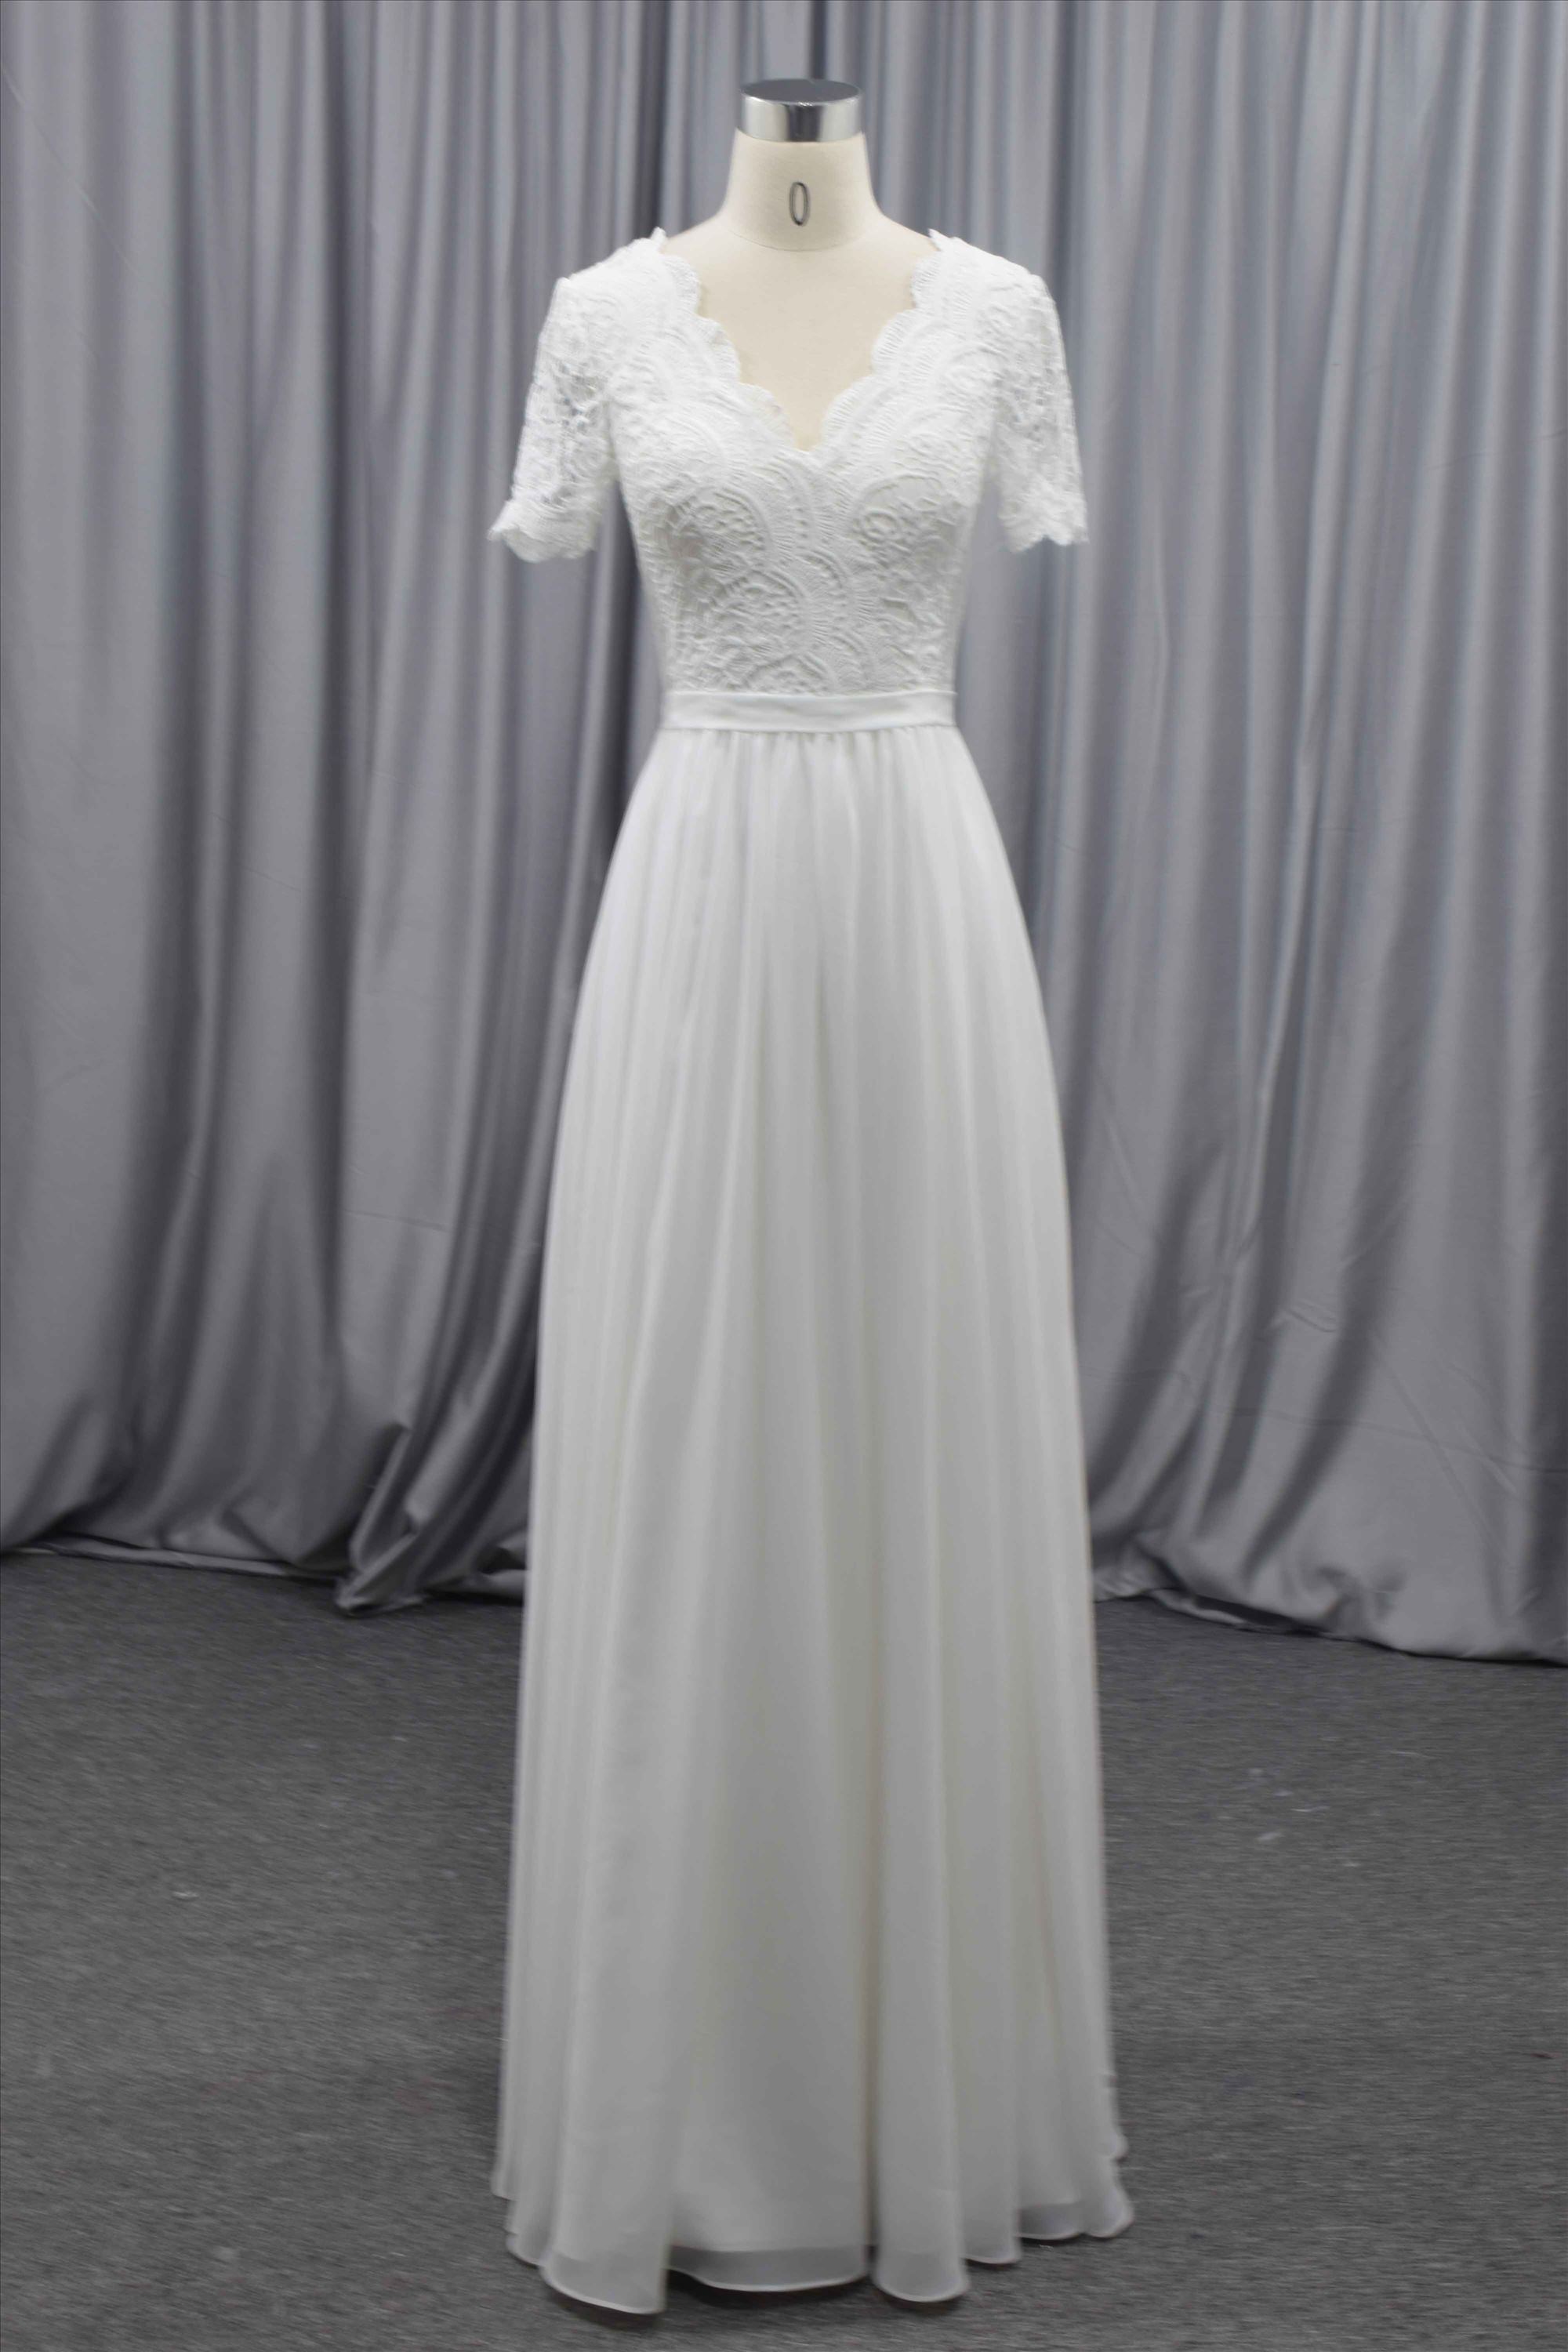 Short sleeves V neckline light chiffon gown wholesale price bridal gown